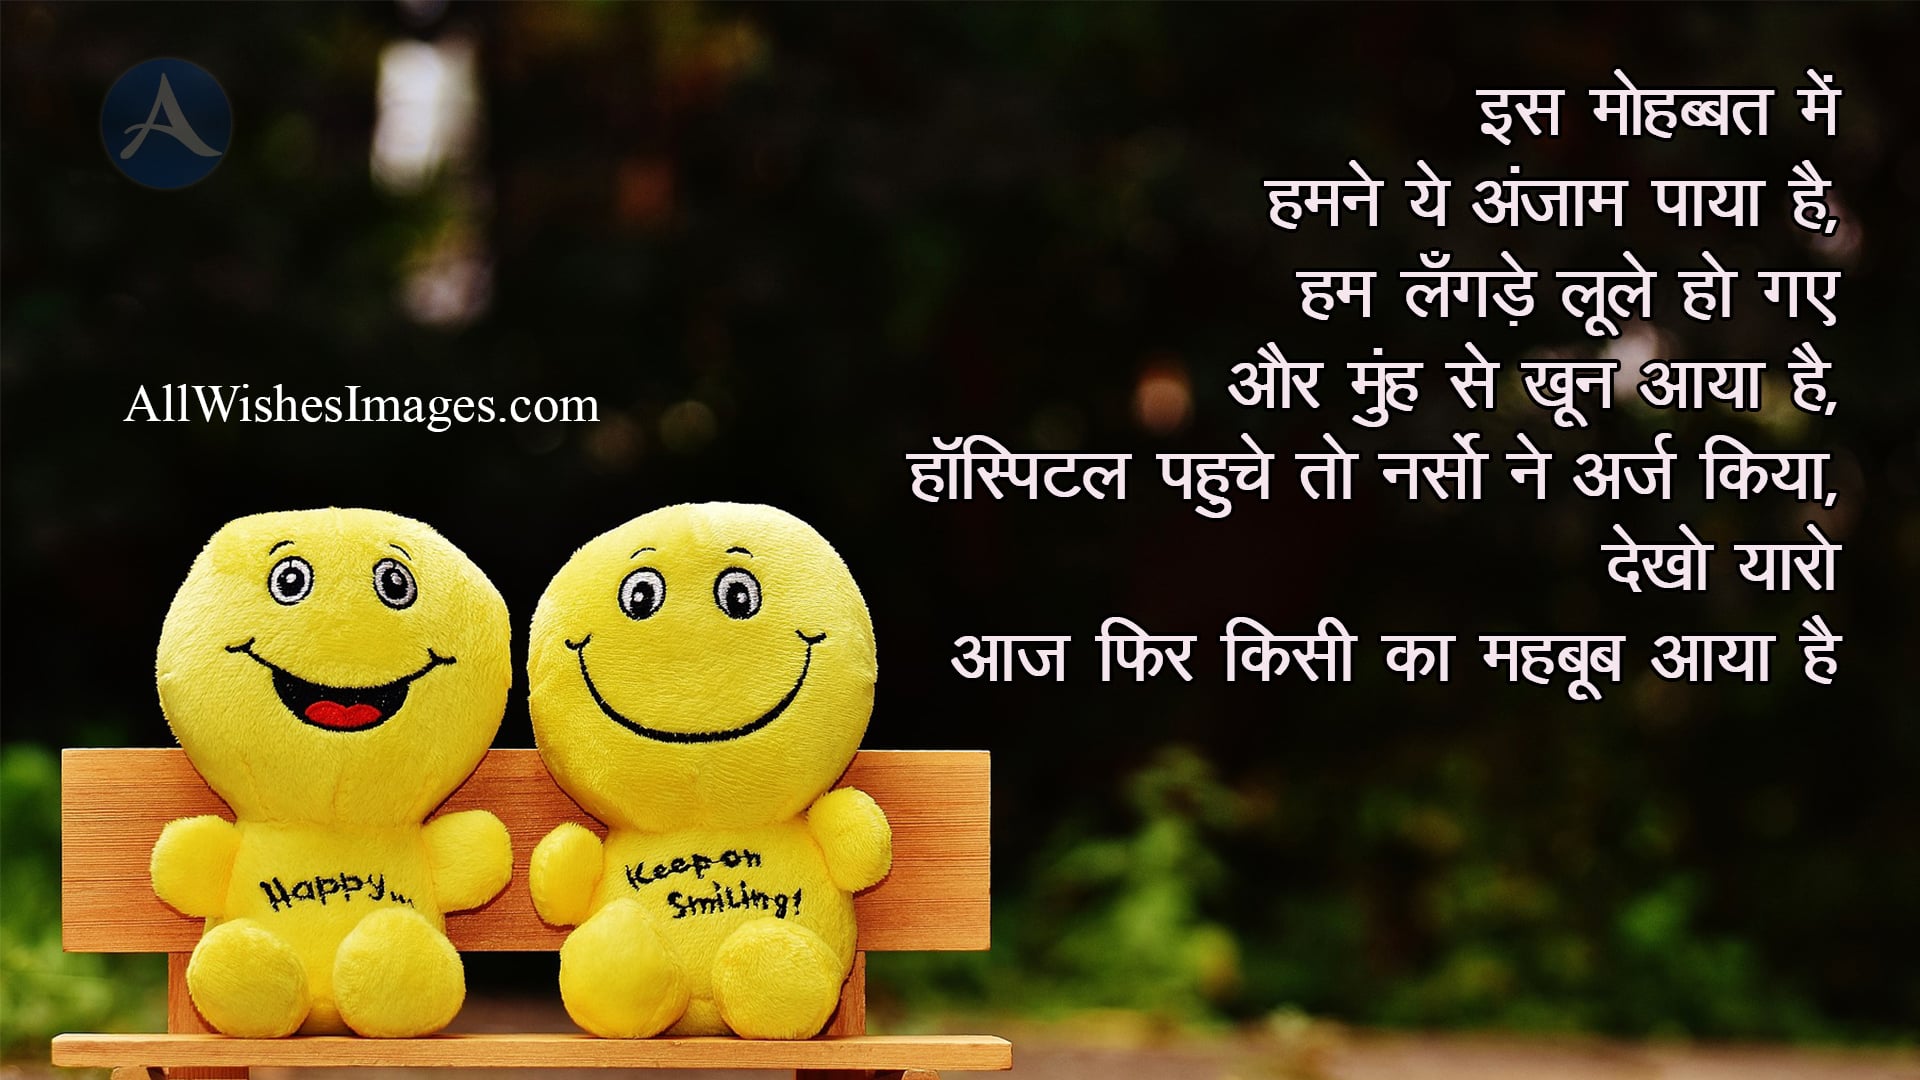 Funny Shayari Hindi - All Wishes Images - Images for WhatsApp